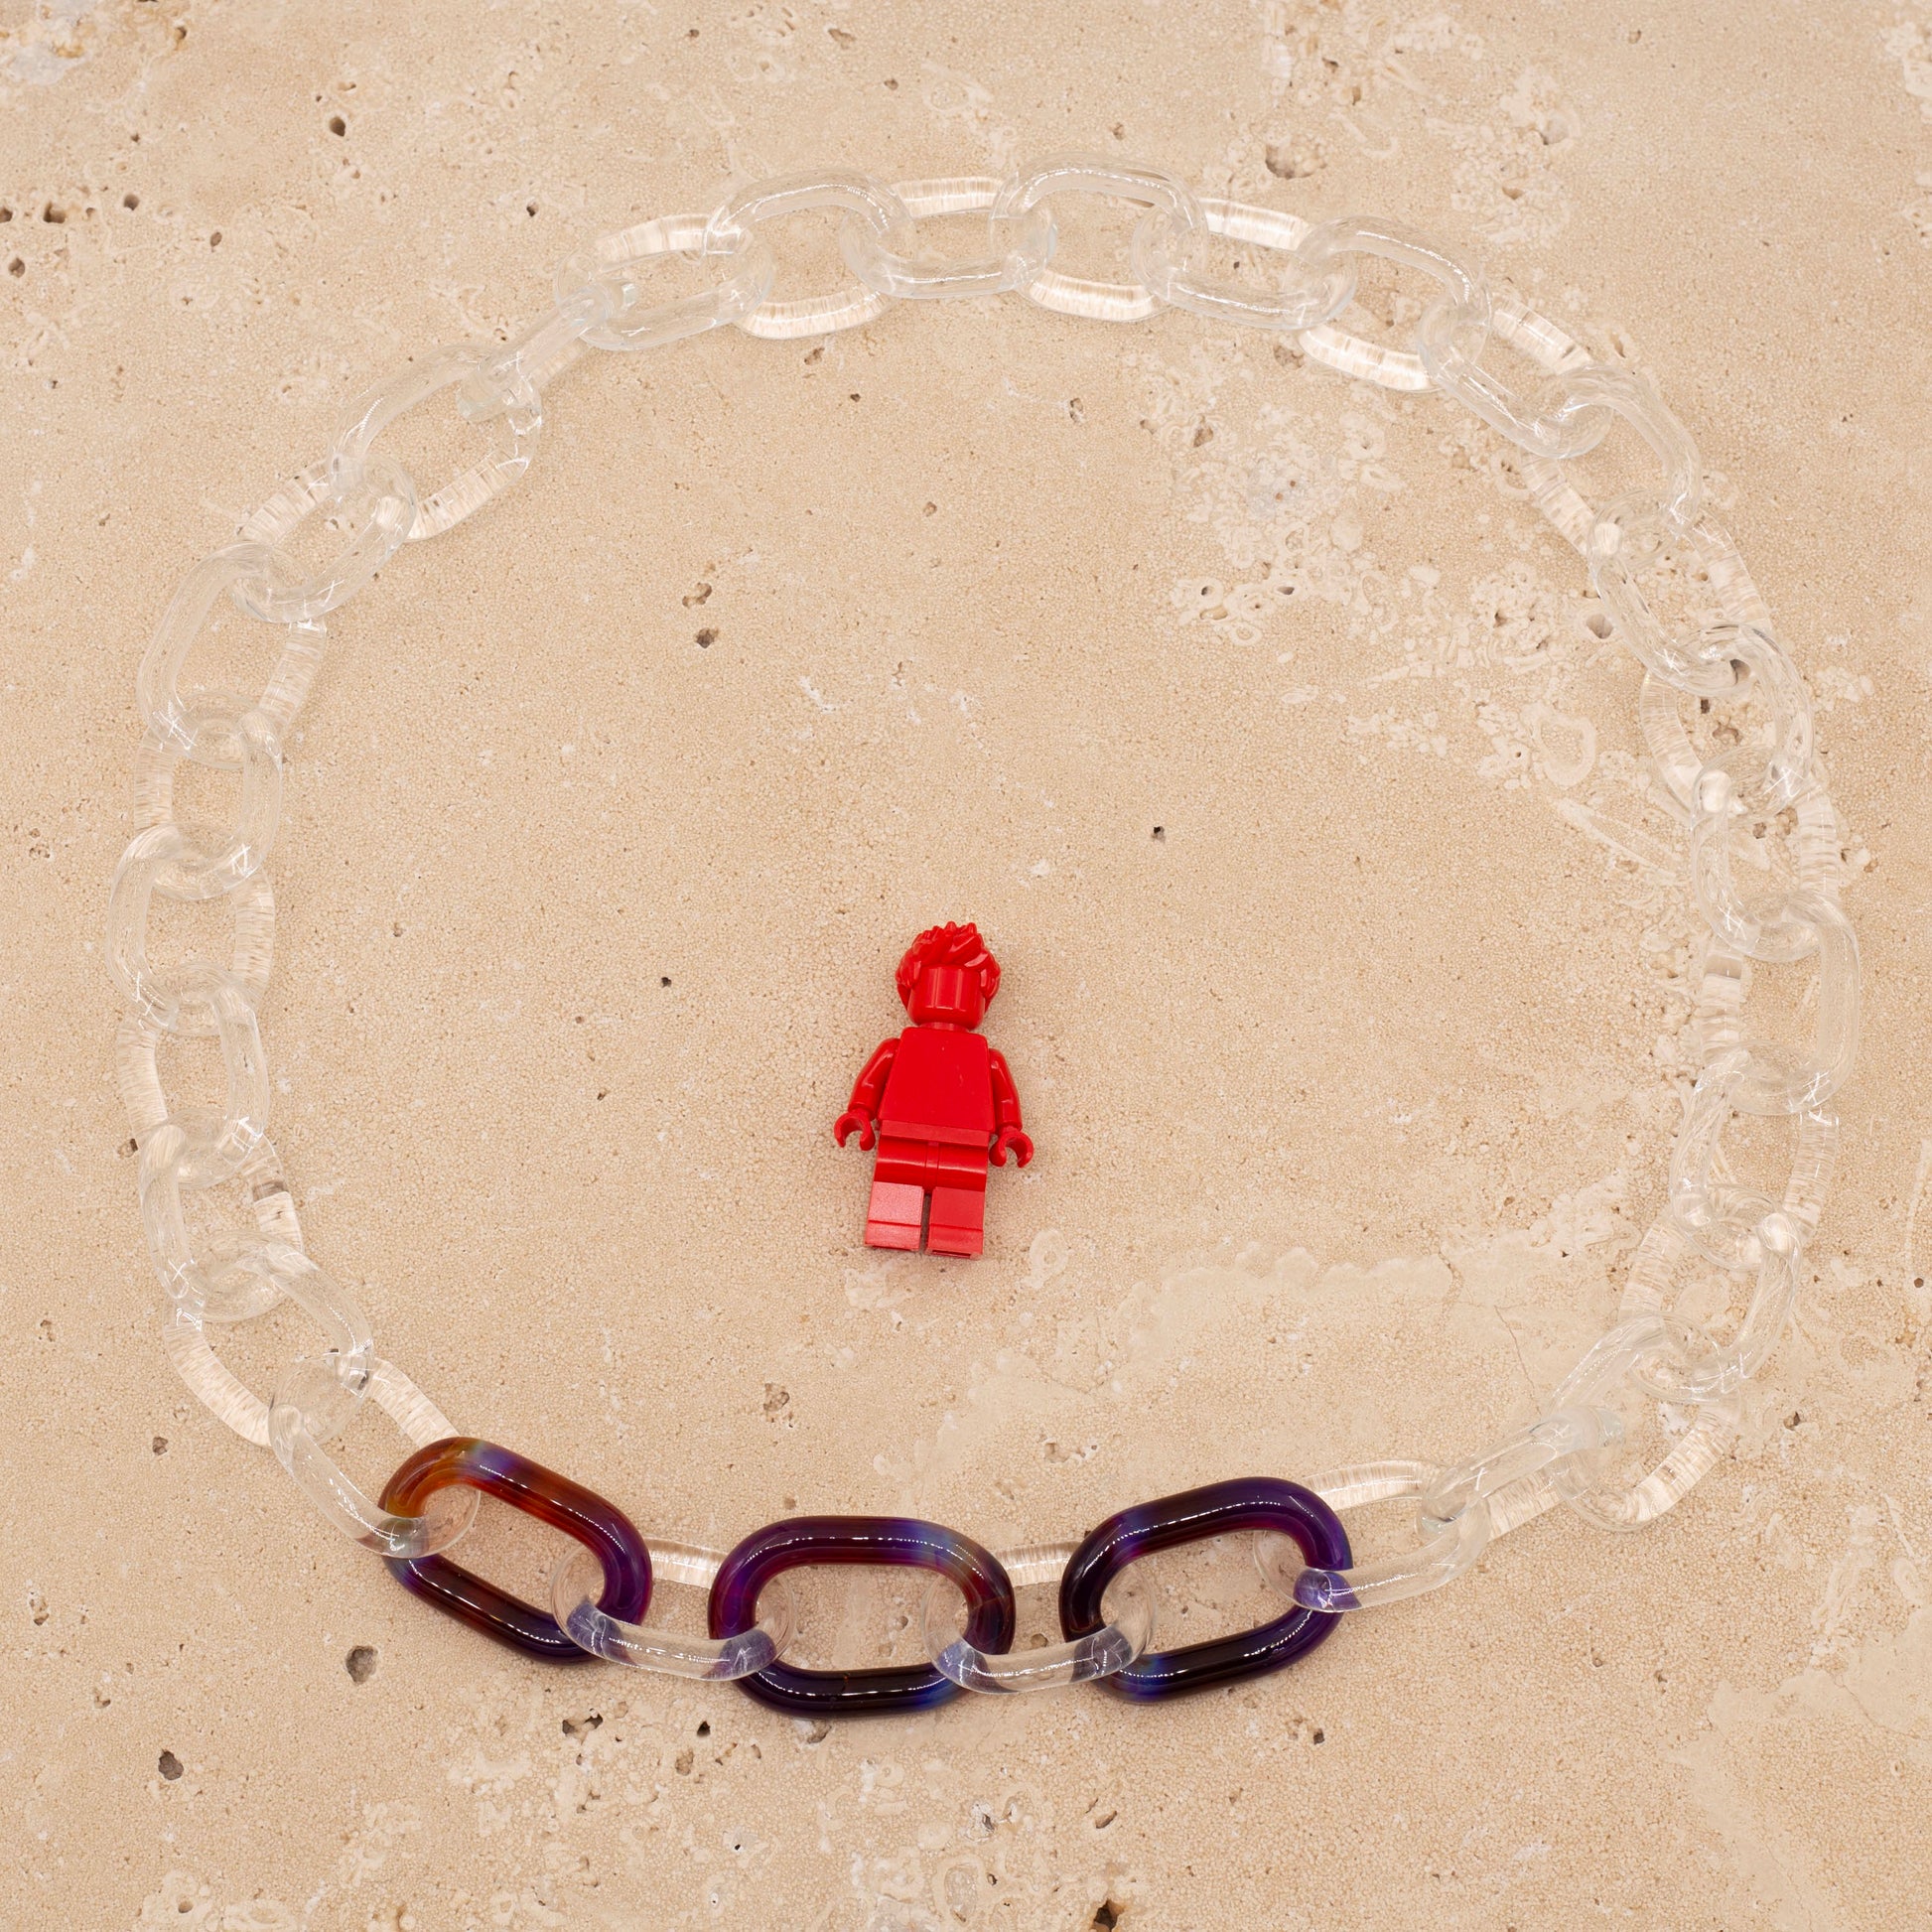 Overhead view of necklace made from clear glass links with 3 coloured links. Image includes a Lego figure for scale.